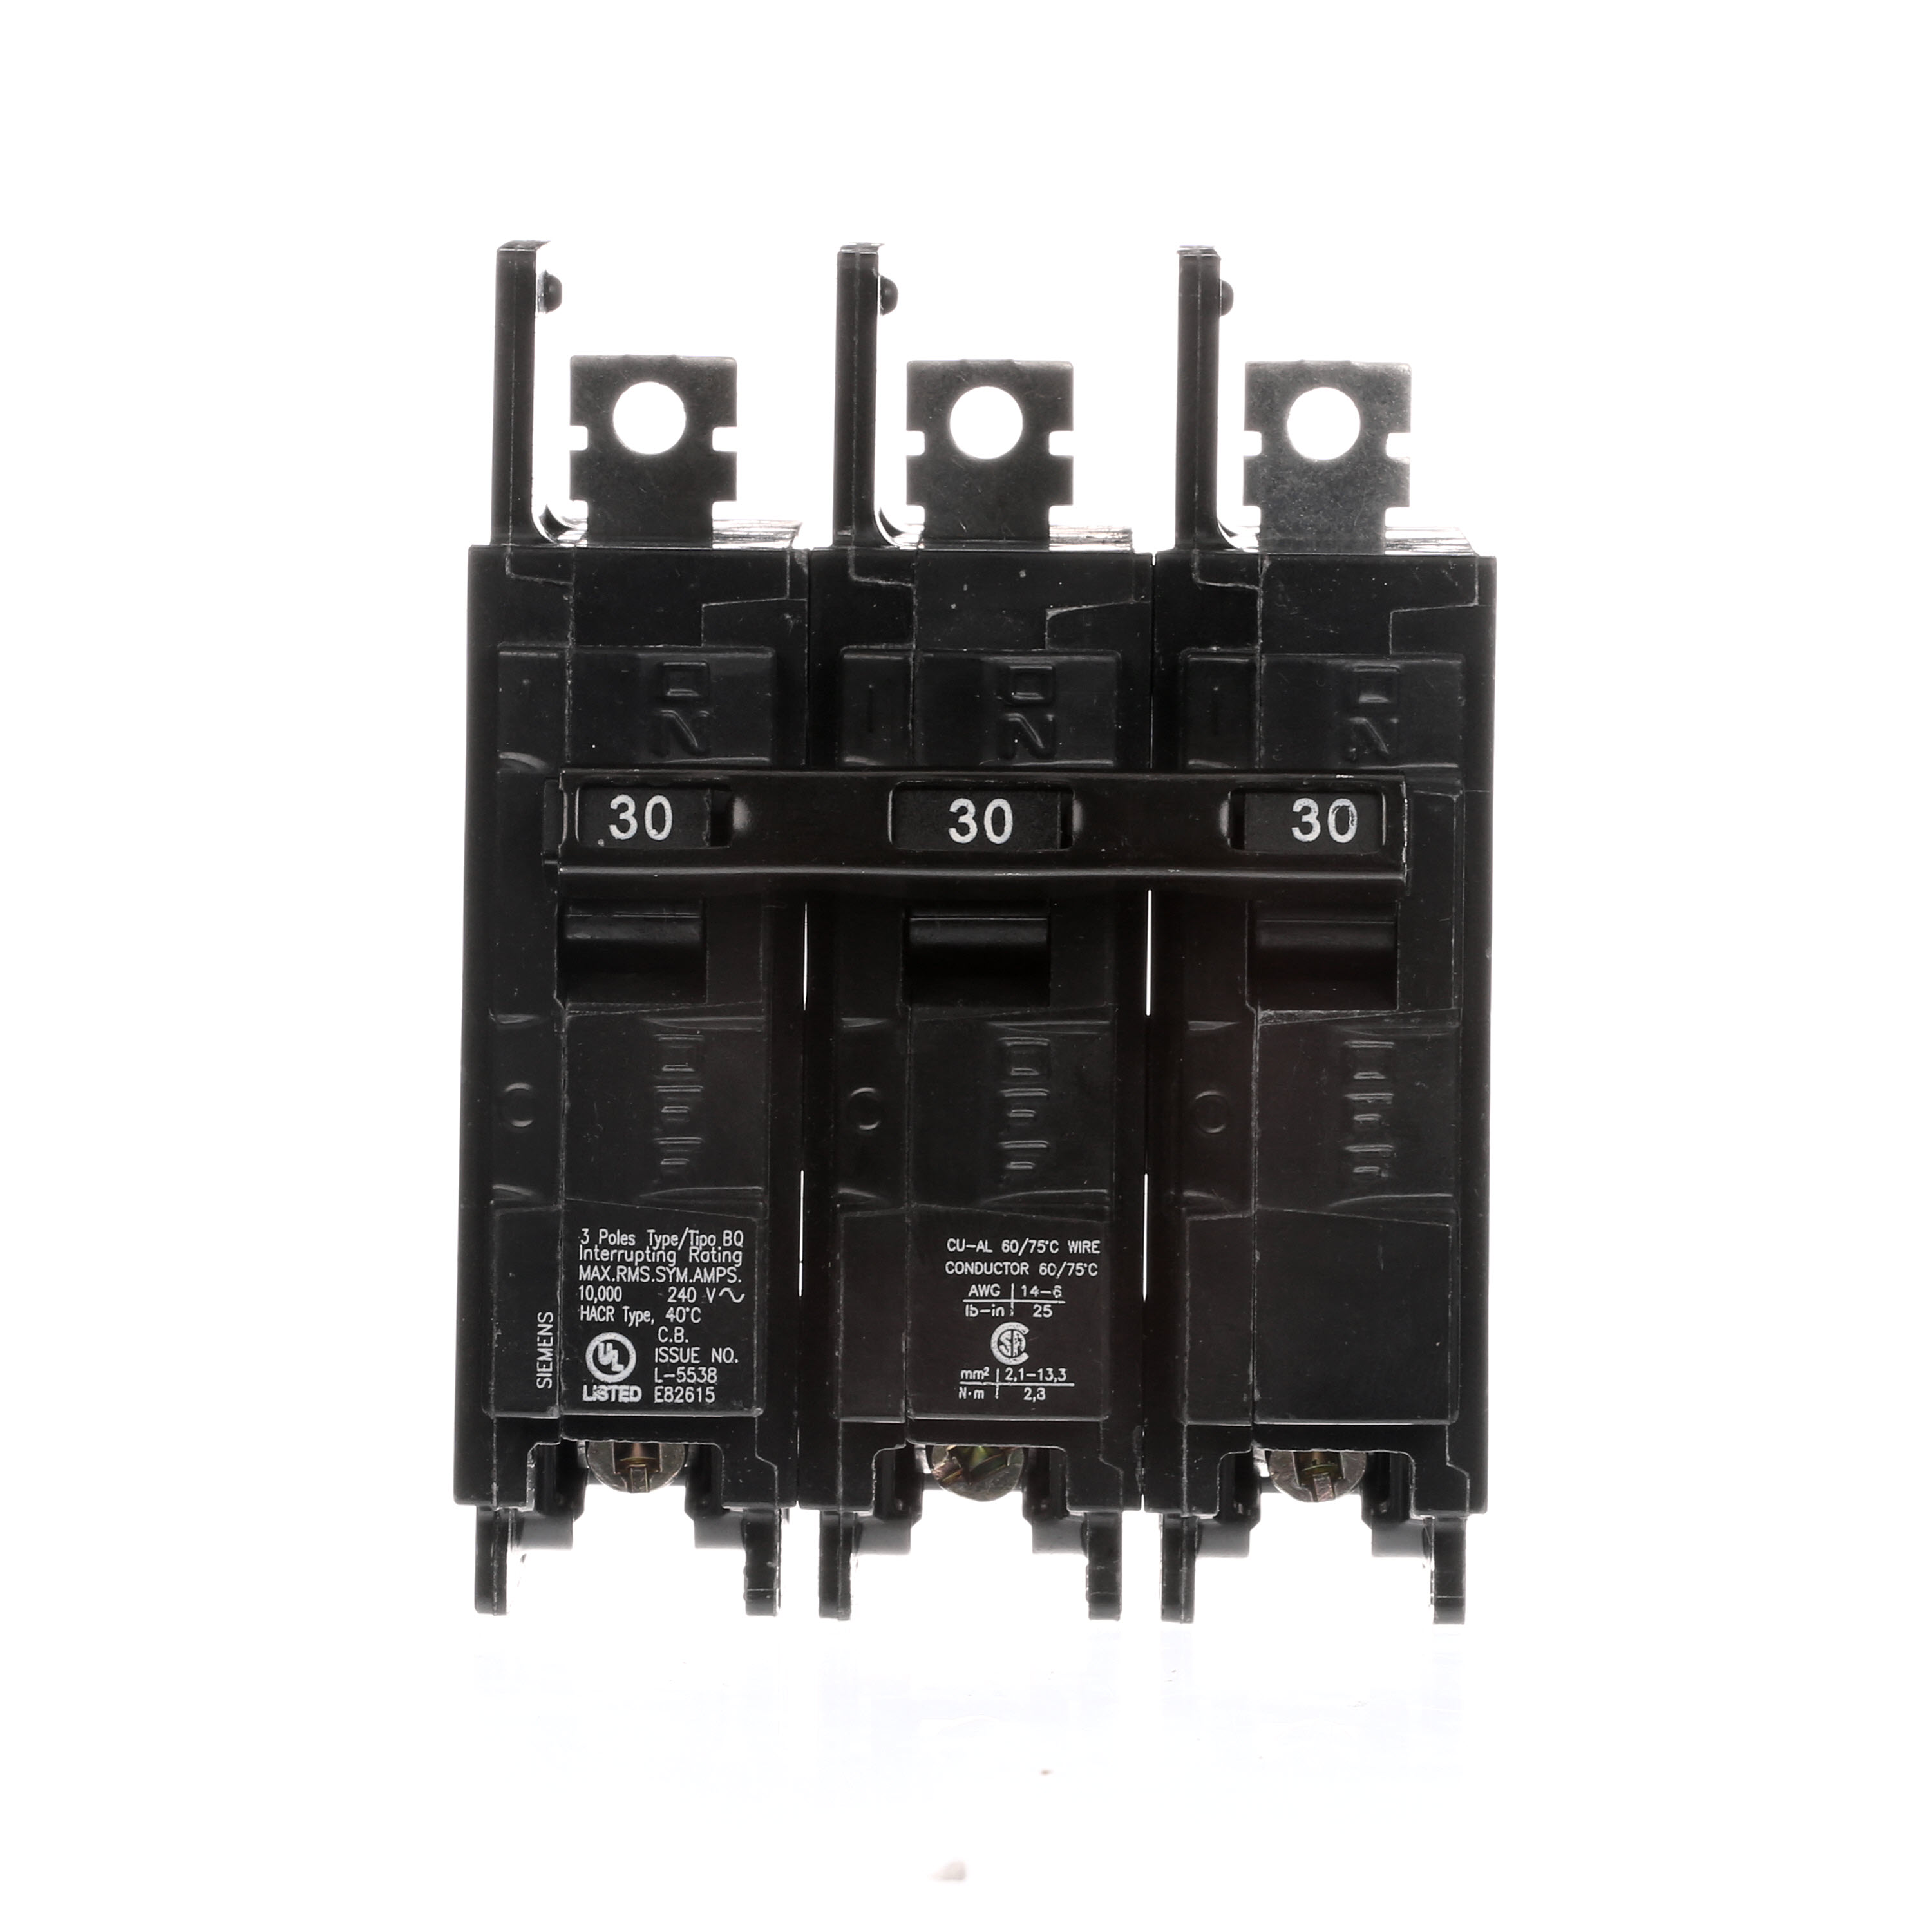 Siemens Low Voltage Molded Case Circuit Breakers General Purpose MCCBs are Circuit Protection Molded Case Circuit Breakers. 3-Pole Common-Trip circuit breaker type BQ. Rated 240V (030A) (AIR 10 kA). Special features Load side lugs are included.